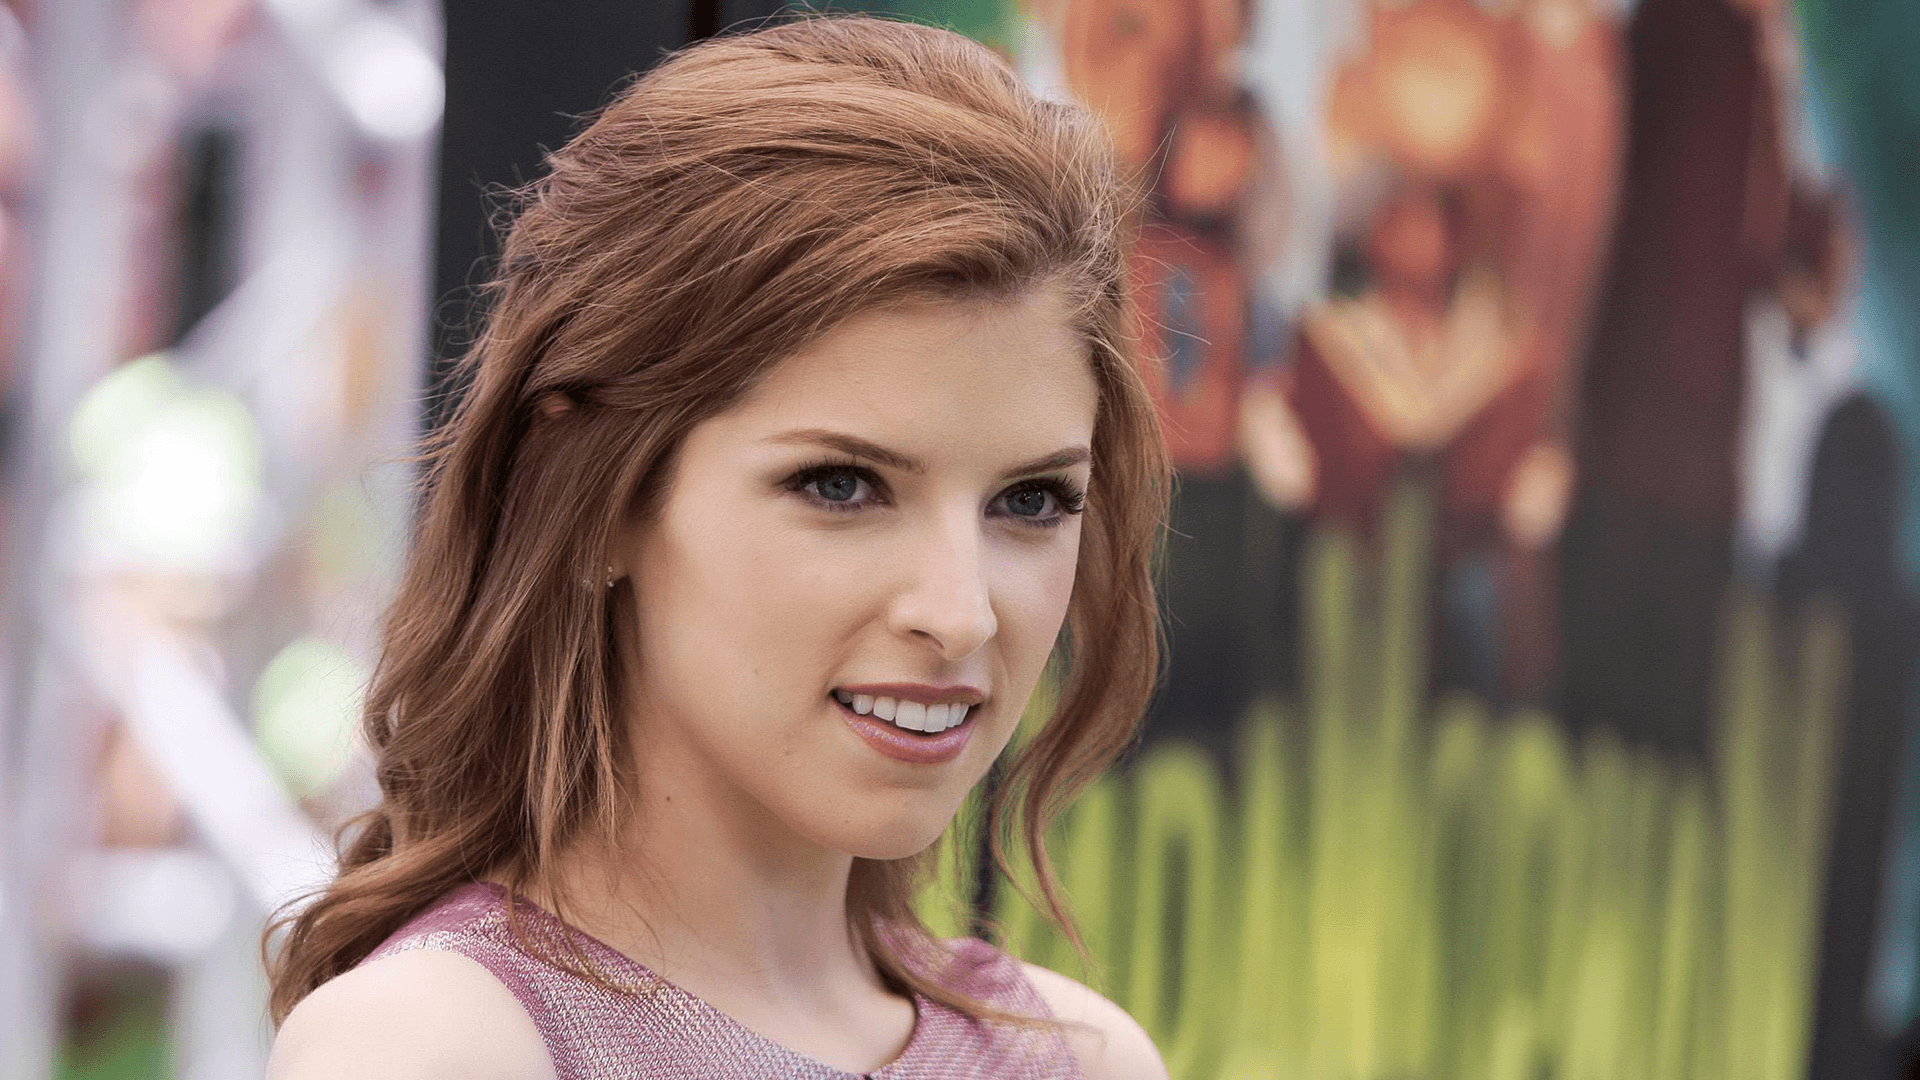 Anna Kendrick Wallpaper Image Photo Picture Background